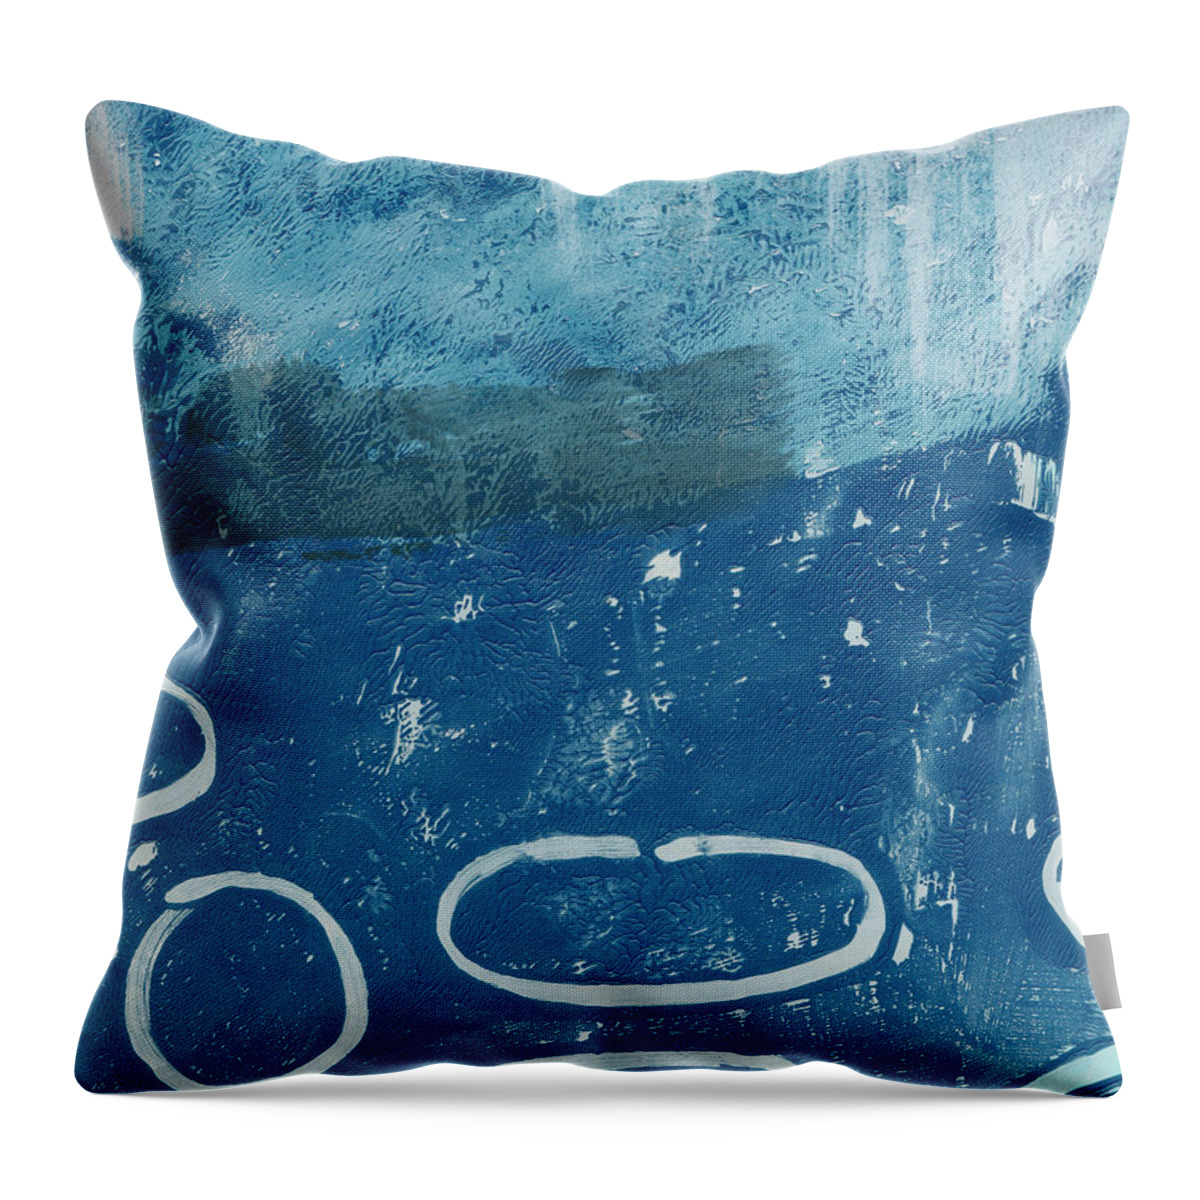 Abstract Throw Pillow featuring the painting River Walk 3- Art by Linda Woods by Linda Woods